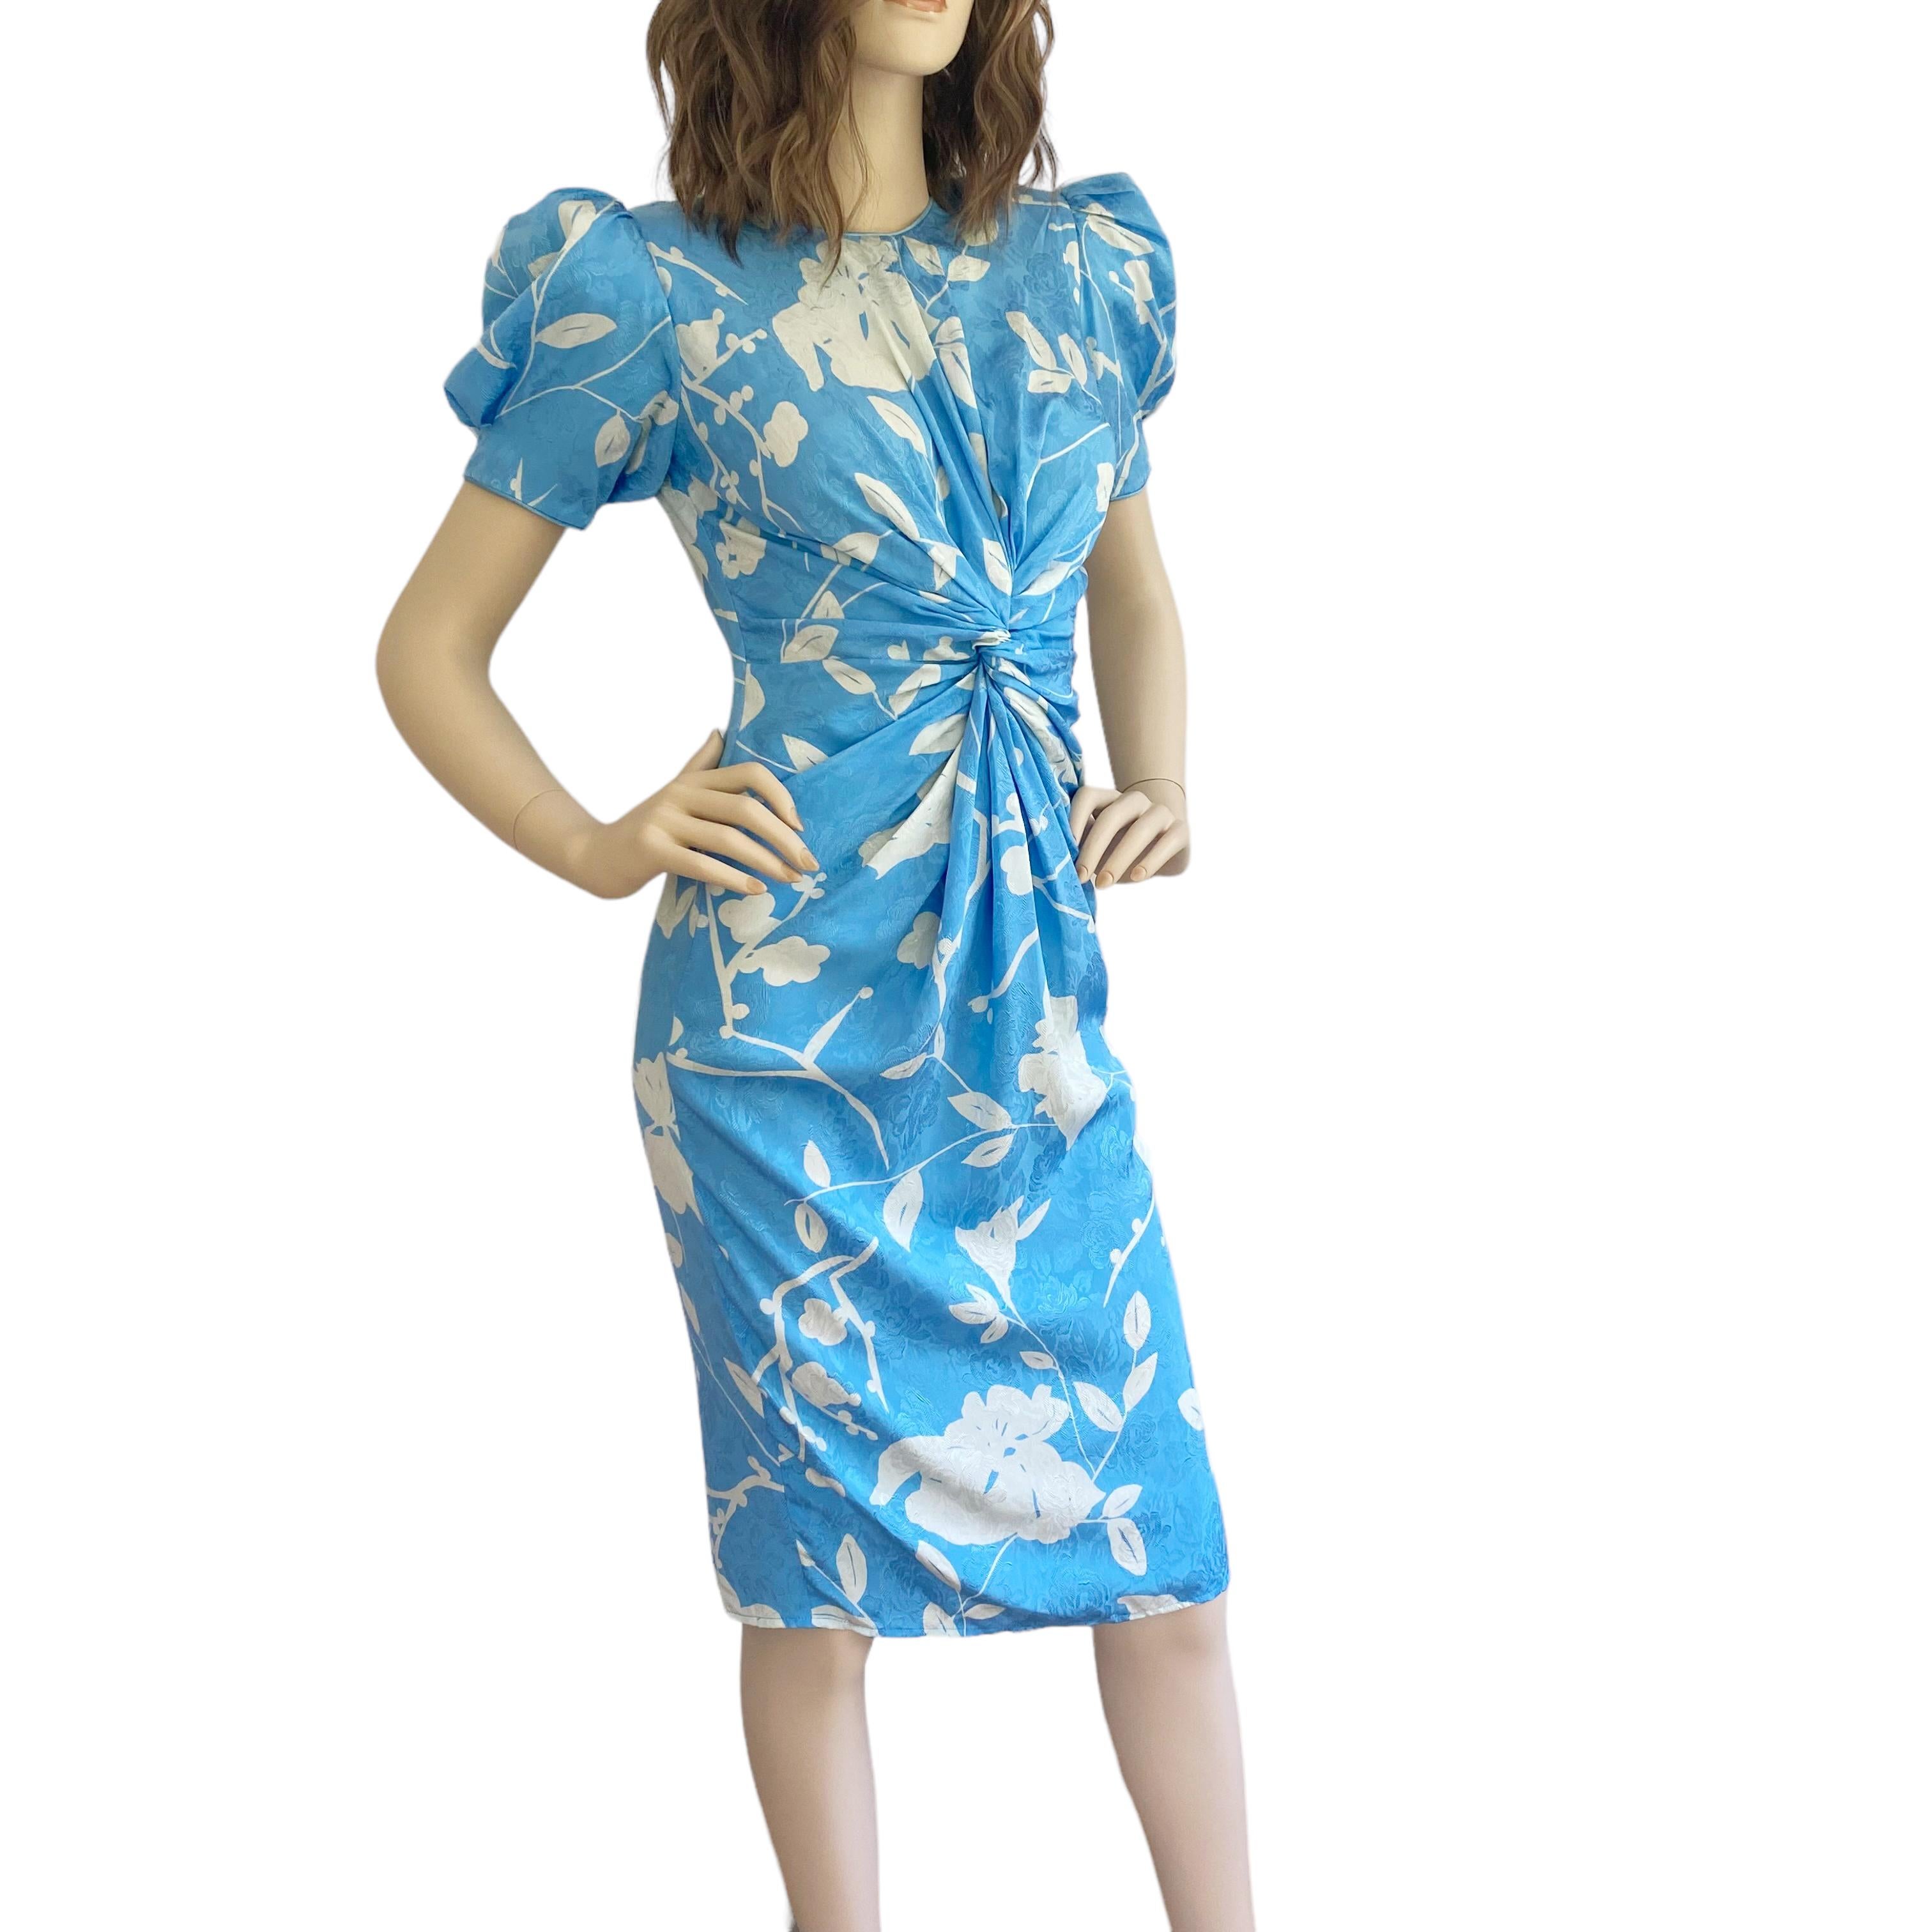 Flattering dress with puff sleeves and shoulder pads.
Invisible back zipper entry.

White floral printed on Flora's original-designed floral silk jacquard textile.
 
Tag reads 2 but can fit up to more sizes thanks to the cut.
Measures approximately